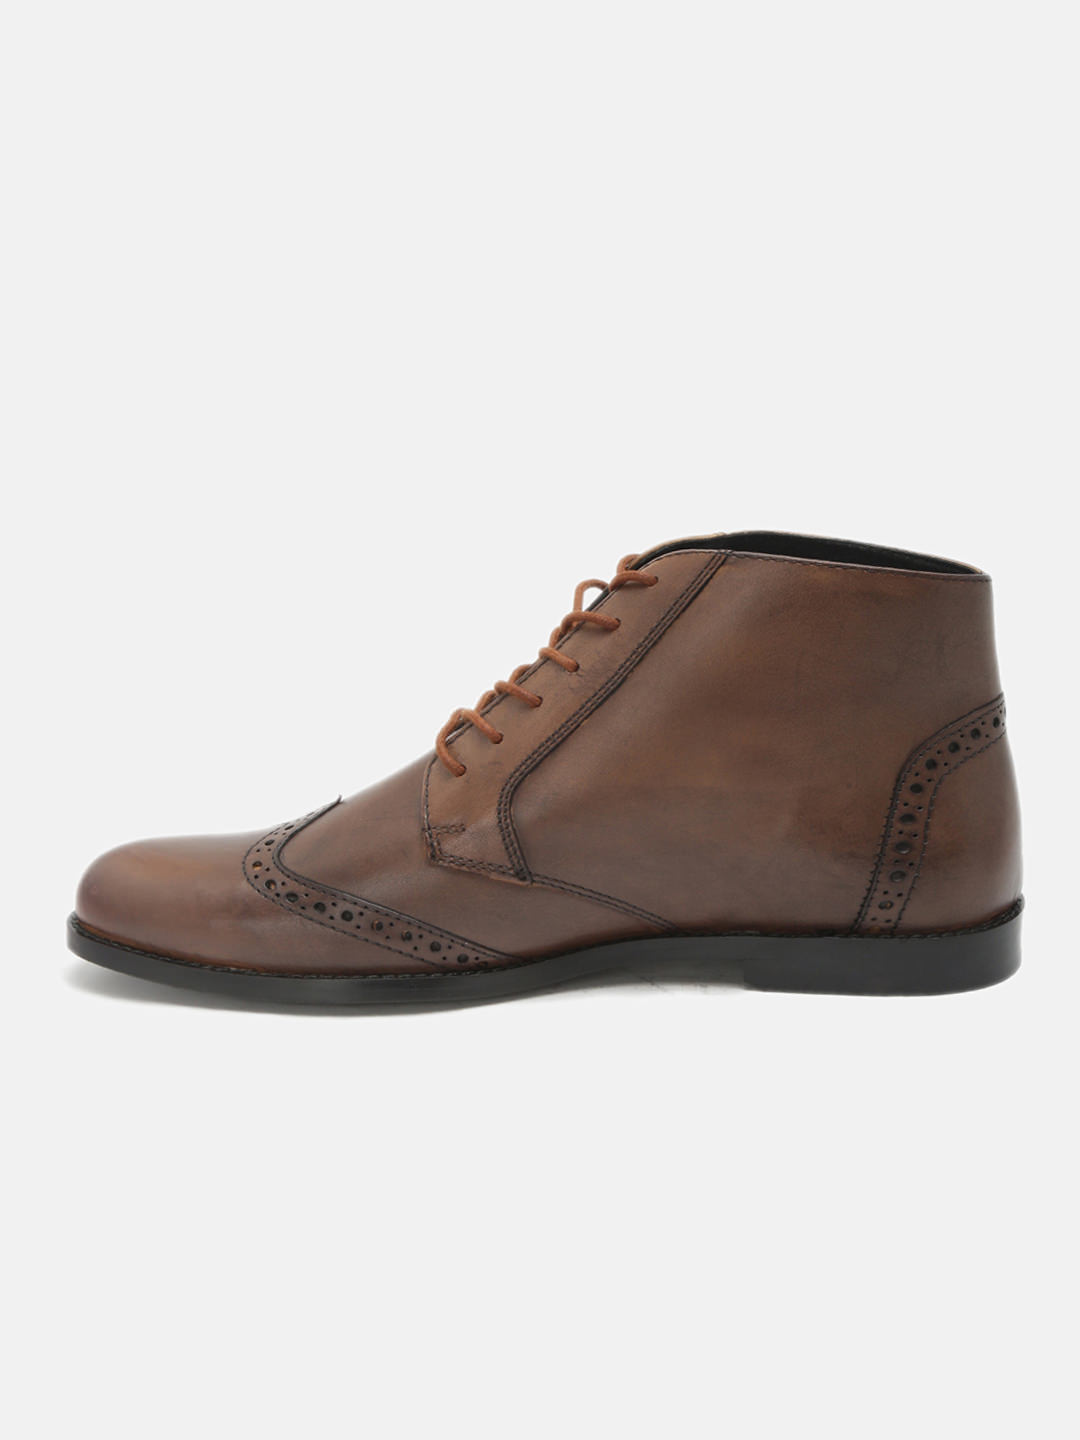 Genuine Leather Brown High Ankle Boots For Men's